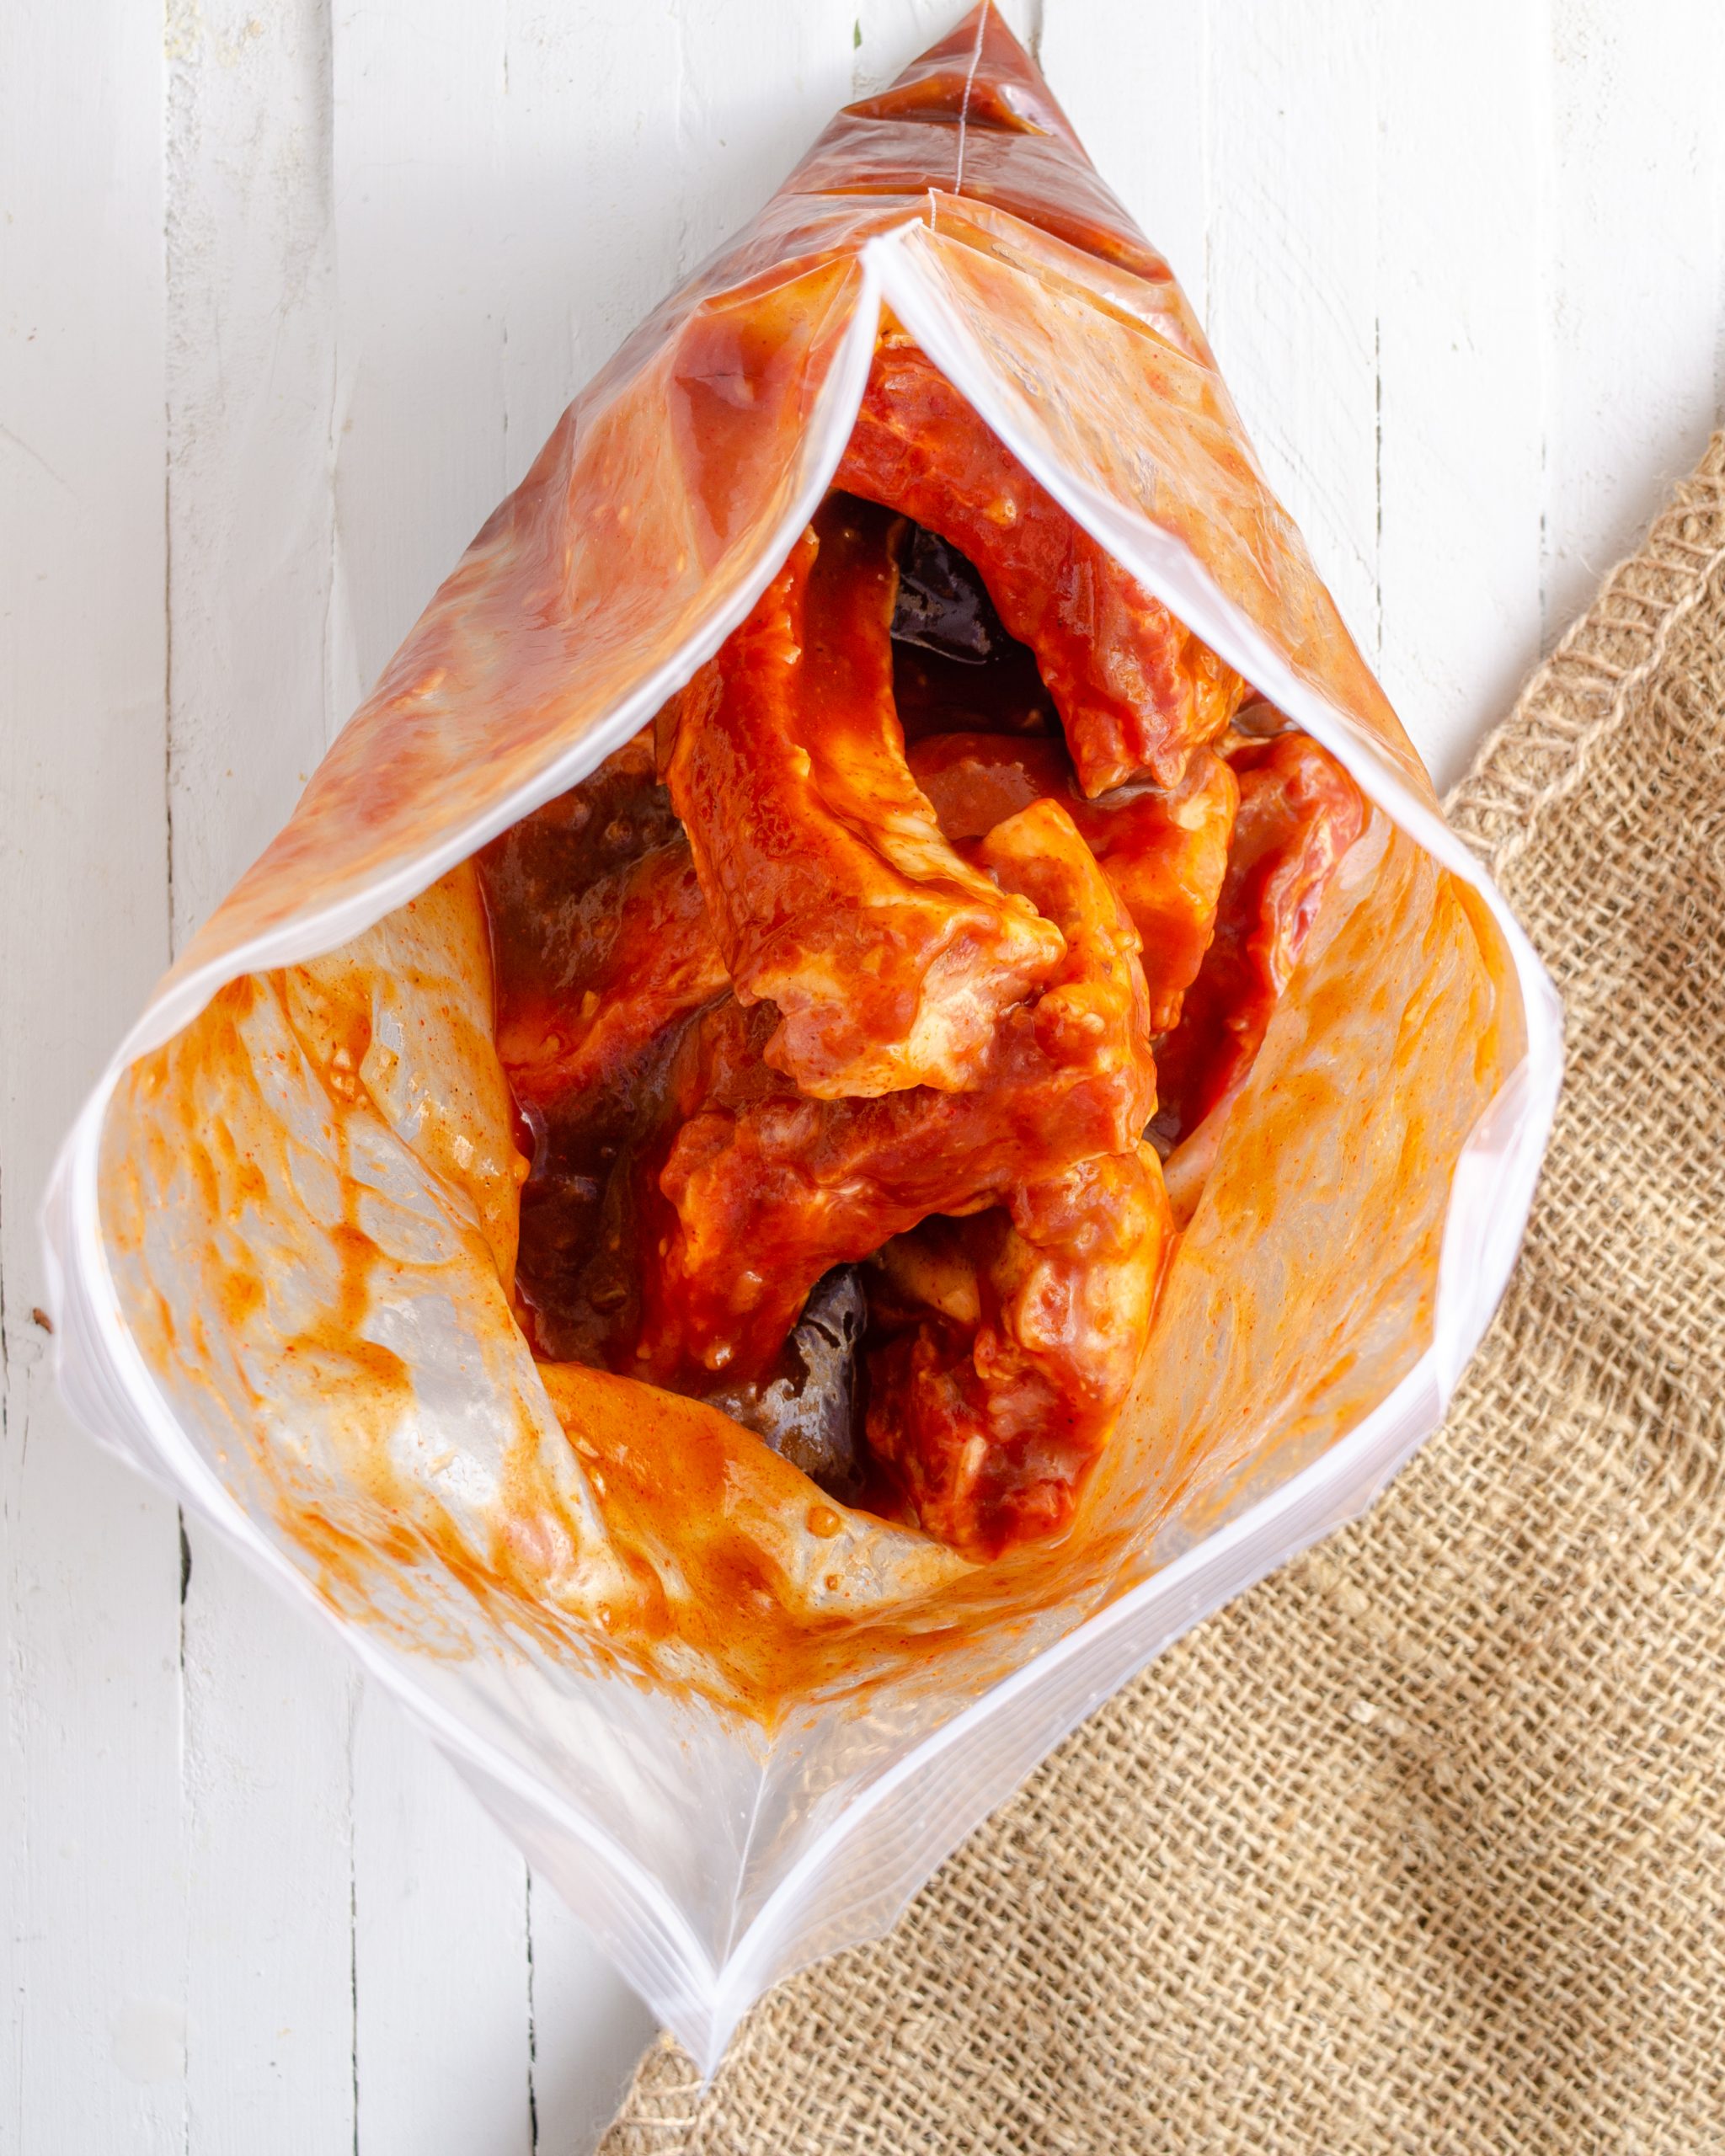 Add the ribs to the Ziploc bag, close it, and toss to coat the ribs in the sauce. 